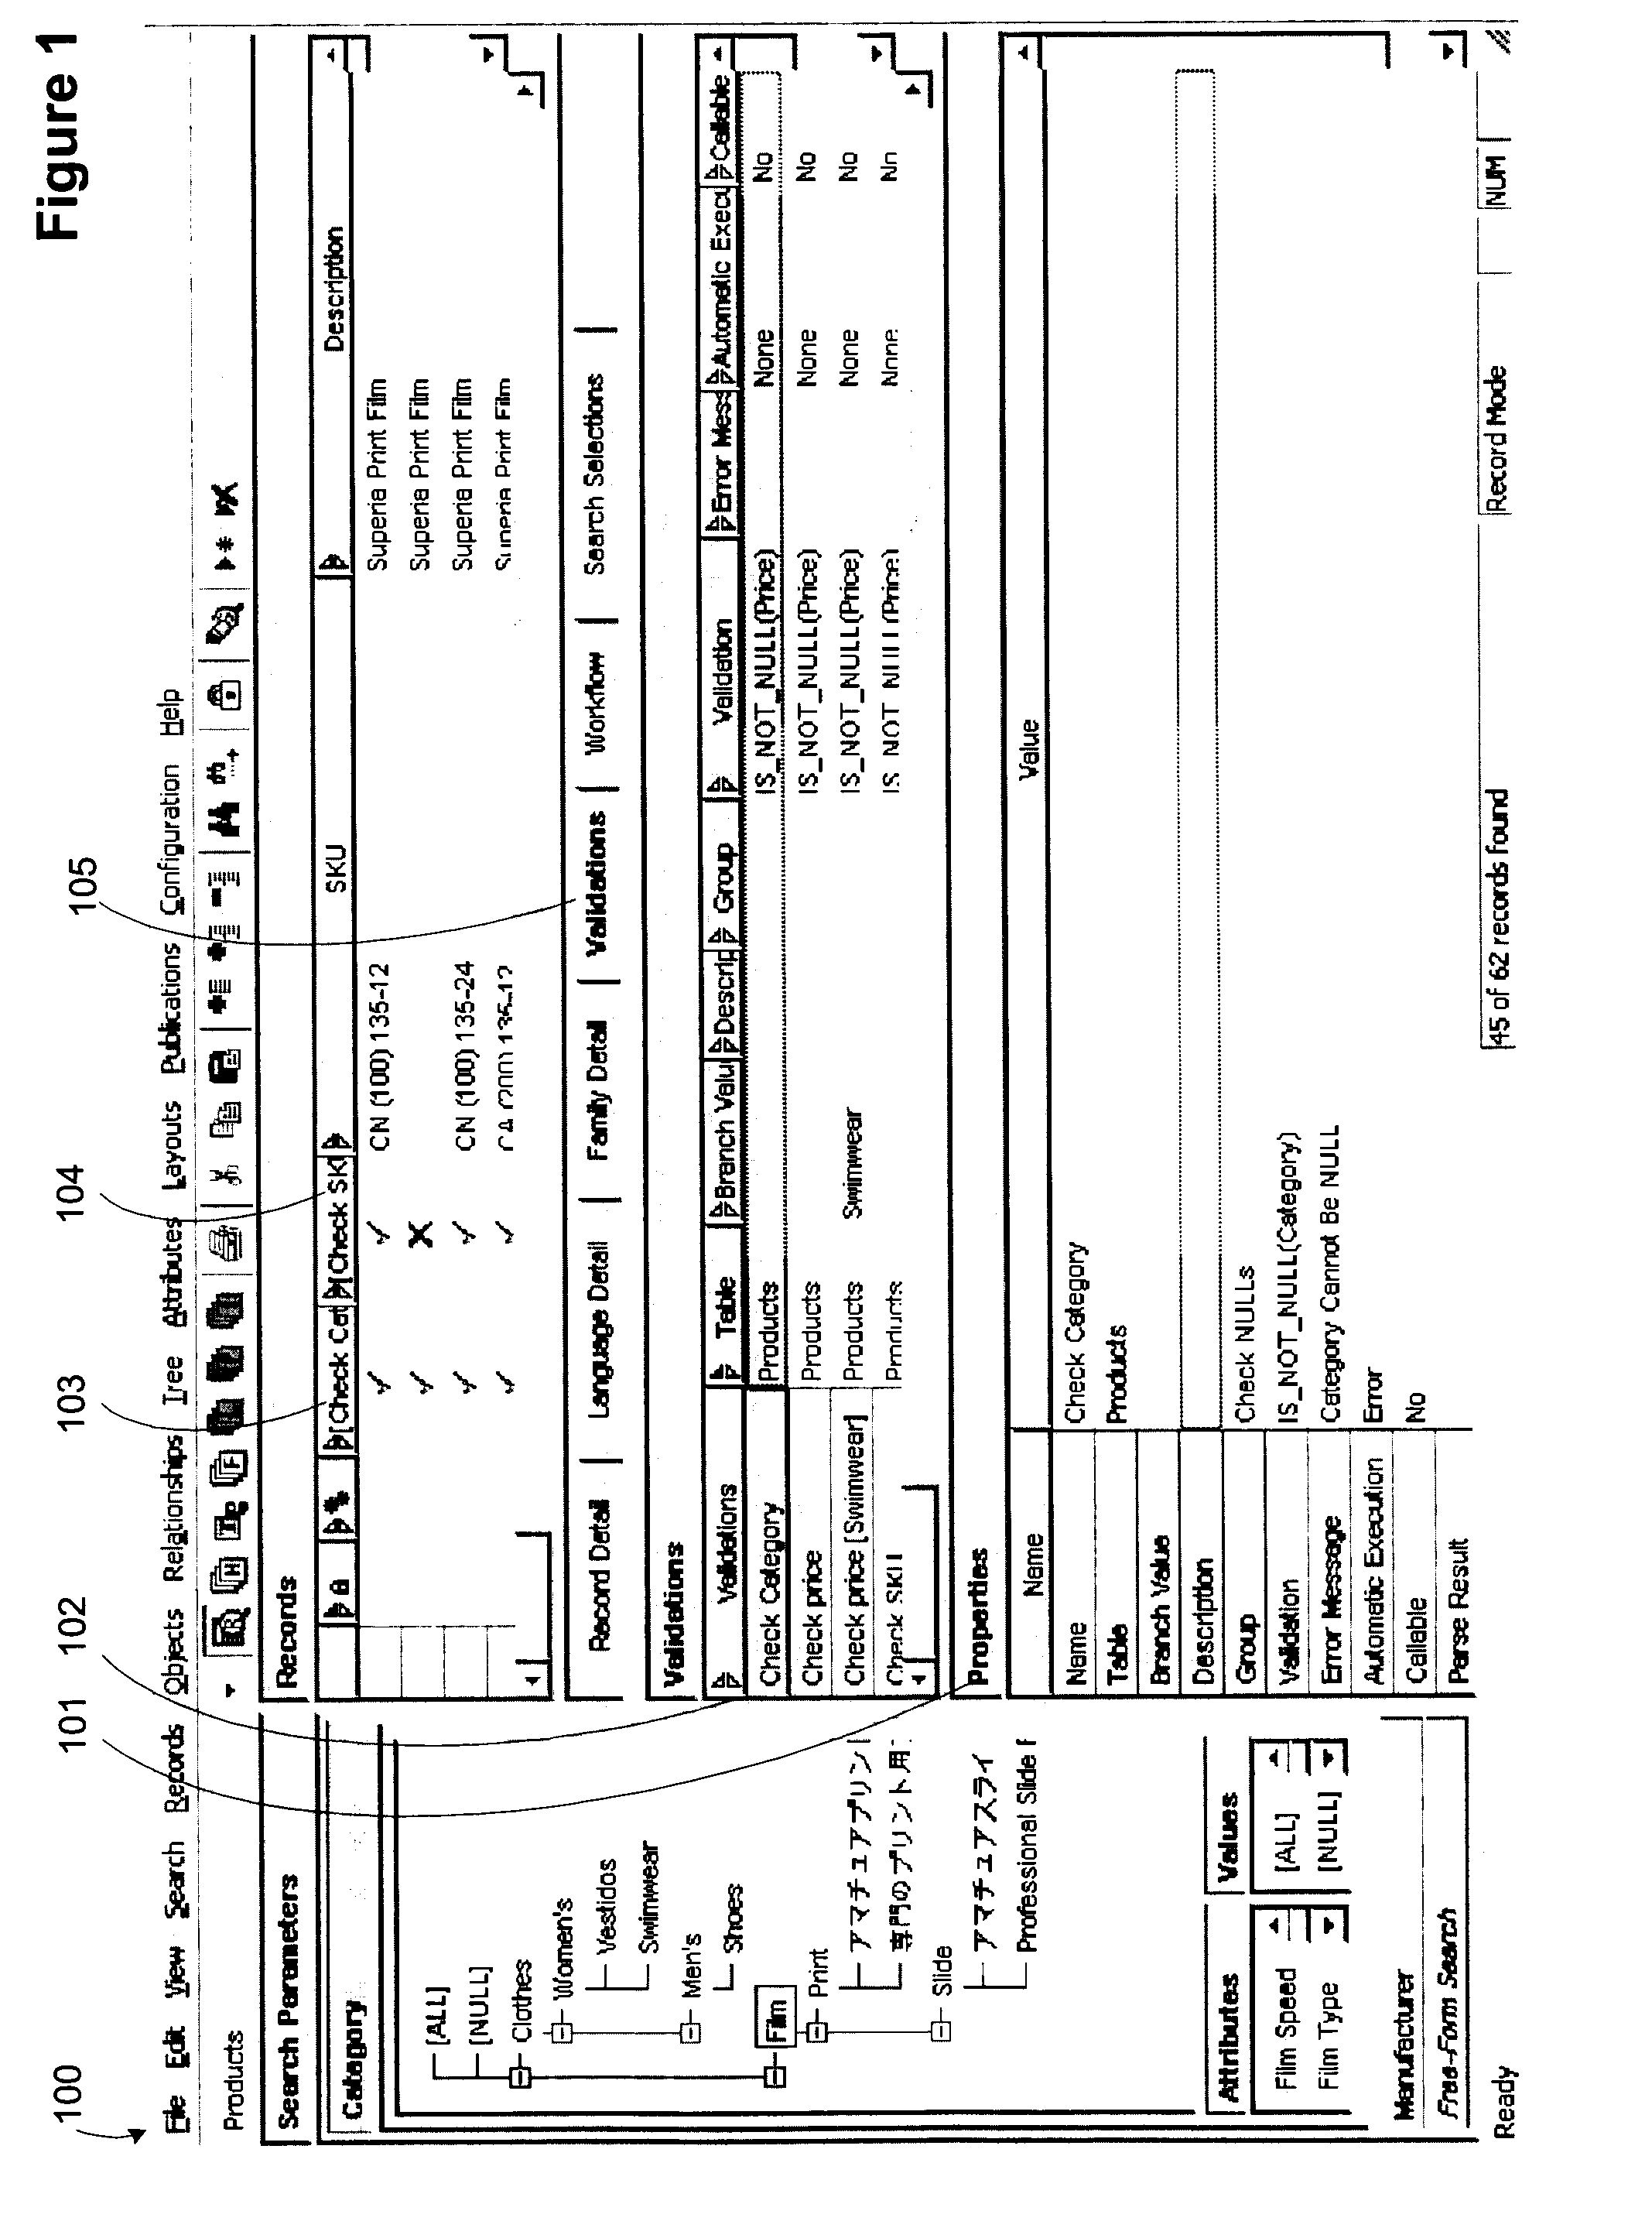 Method for conditionally branching a validation